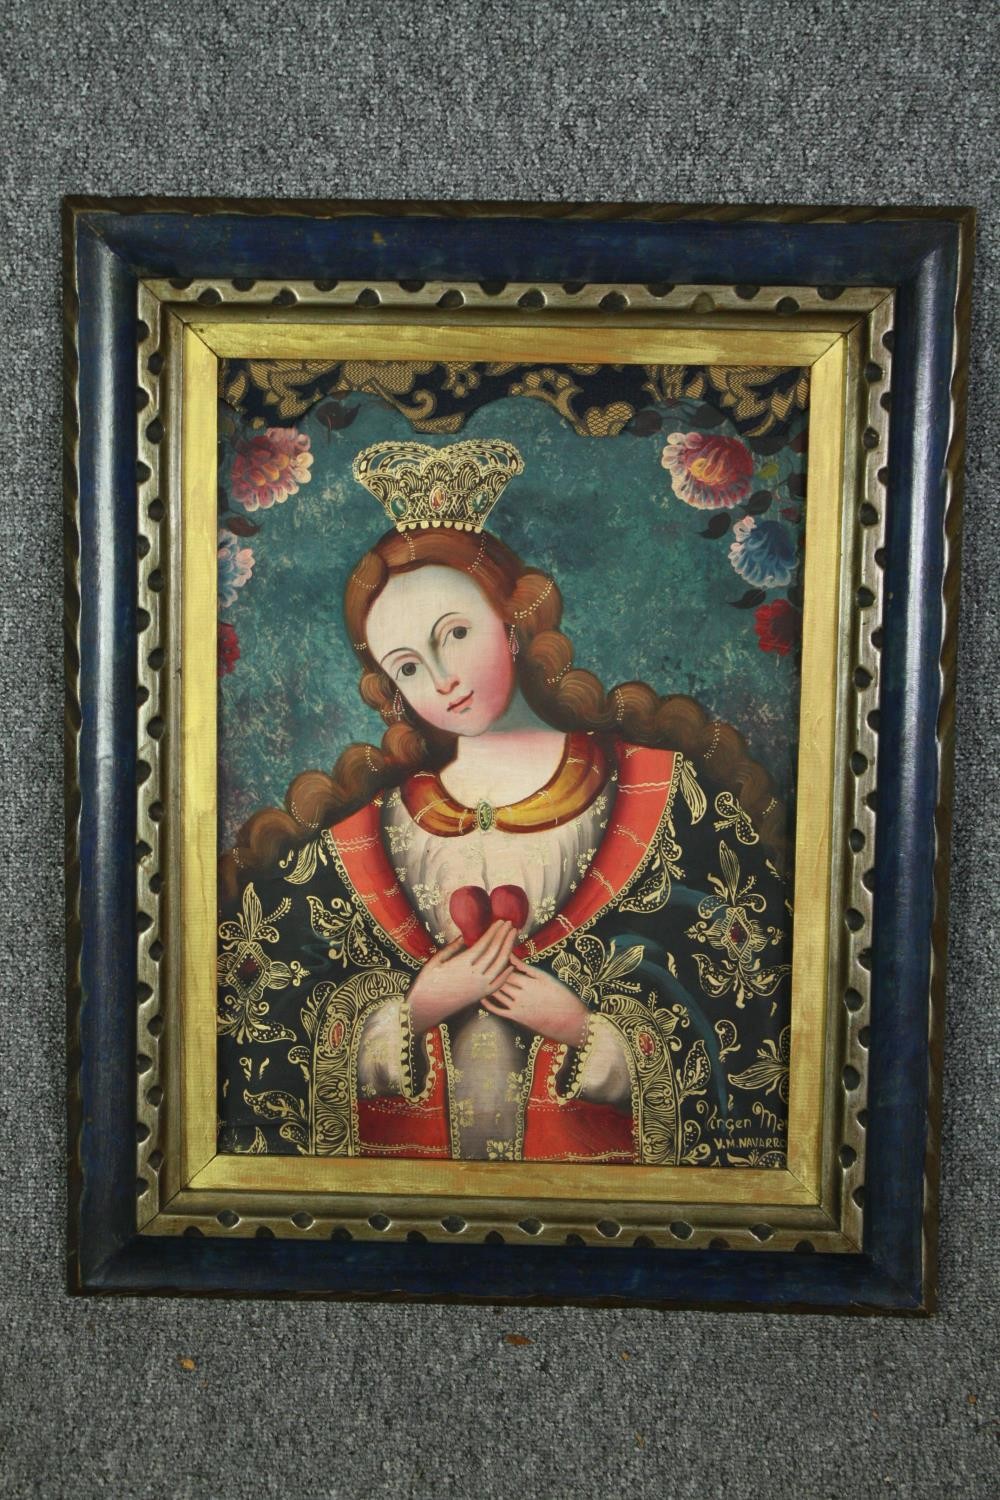 Cusco school, early 20th century, Oil on canvas, portrait of the Virgin Mary, signed V M Navarro. - Image 2 of 4